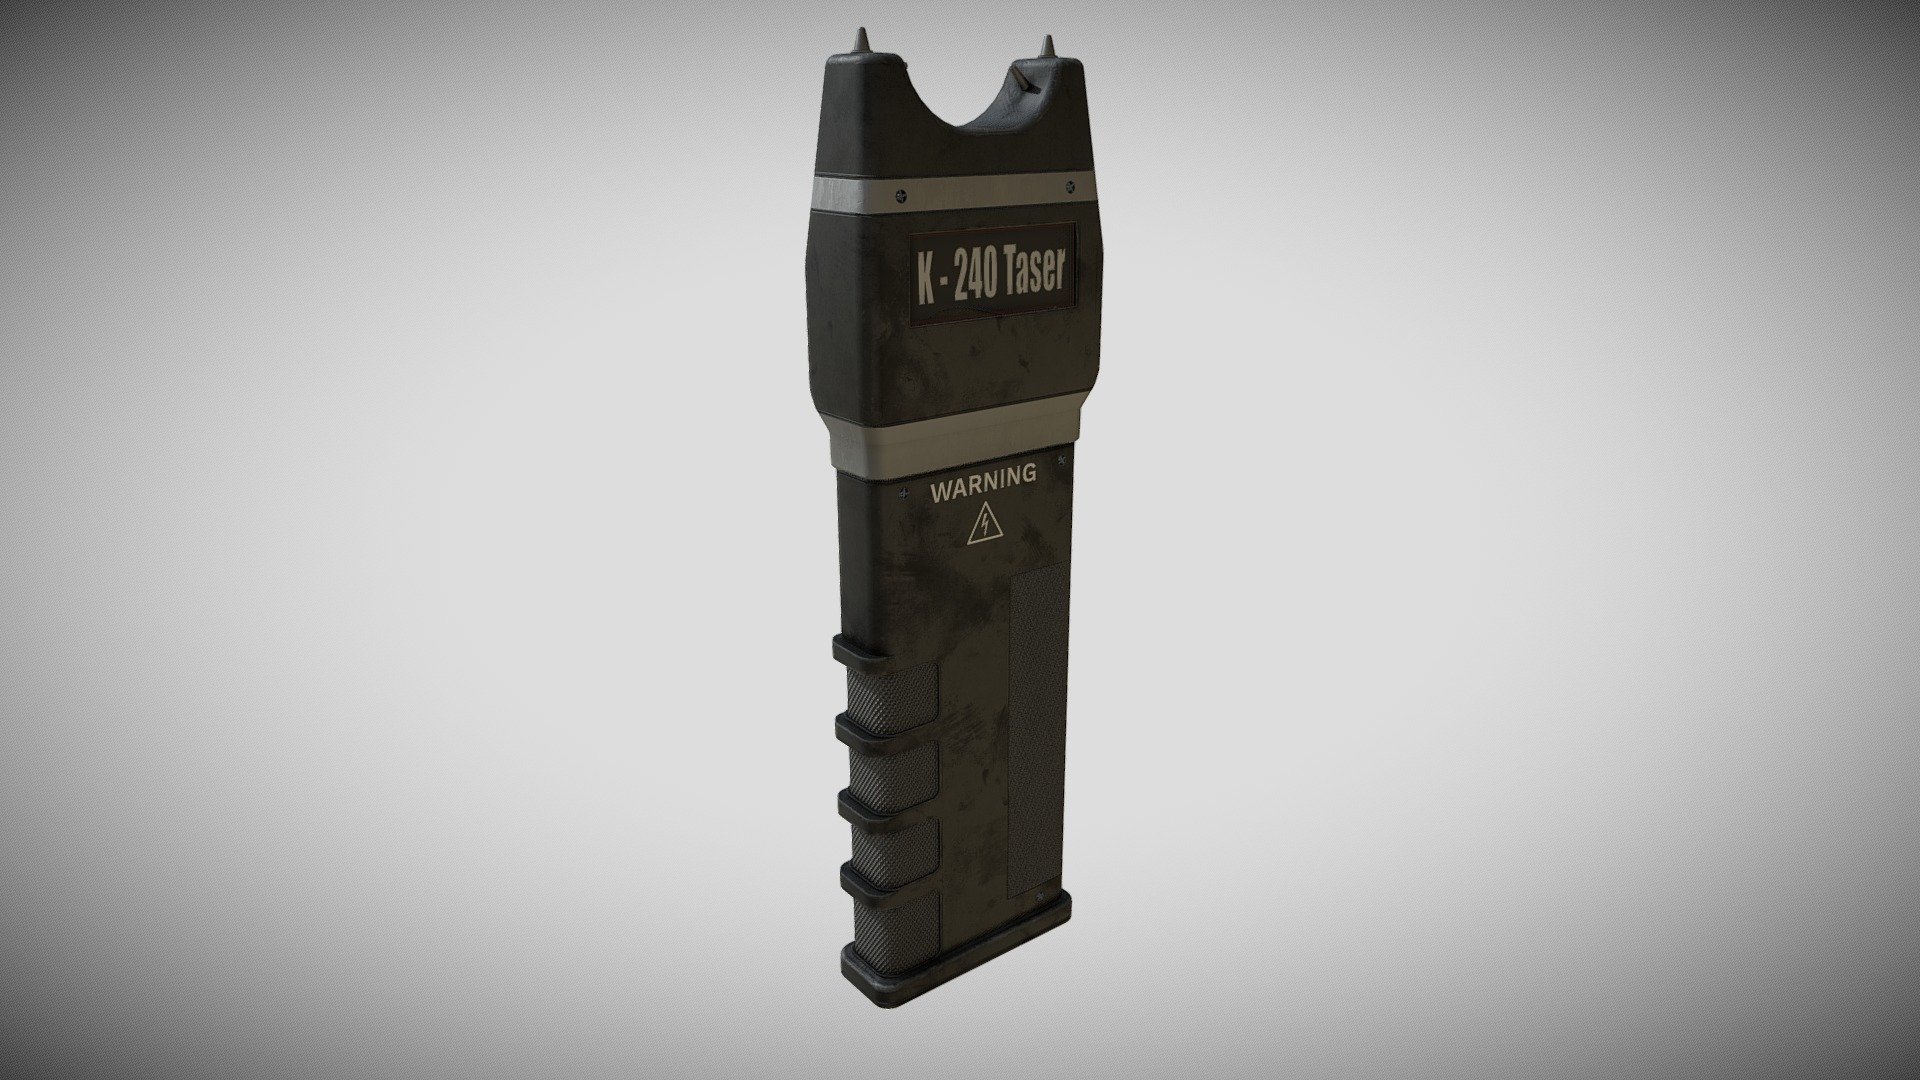 hey. this is my Hand Taser Model

Just write an email and I'll answer any questions as soon as possible.

Substance Painter Texturing Substance Painter Rendering

Technical Details

1 Meshes
4K Textures
Vertex Count: 4,366
Tries: 5,652
Faces: 2,464
LODs: No
Collision: no
Textures

Albedo

Normal

ORM O=Occulsion R=Roughness M=Metalness

please contact us if you have any questions or problems.Meik

-Support Email: Meik.W.Models@gmx.de

-Support Discord: https://discord.gg/CAXfQrtTgu - Taser - Buy Royalty Free 3D model by MW-Models 3d model